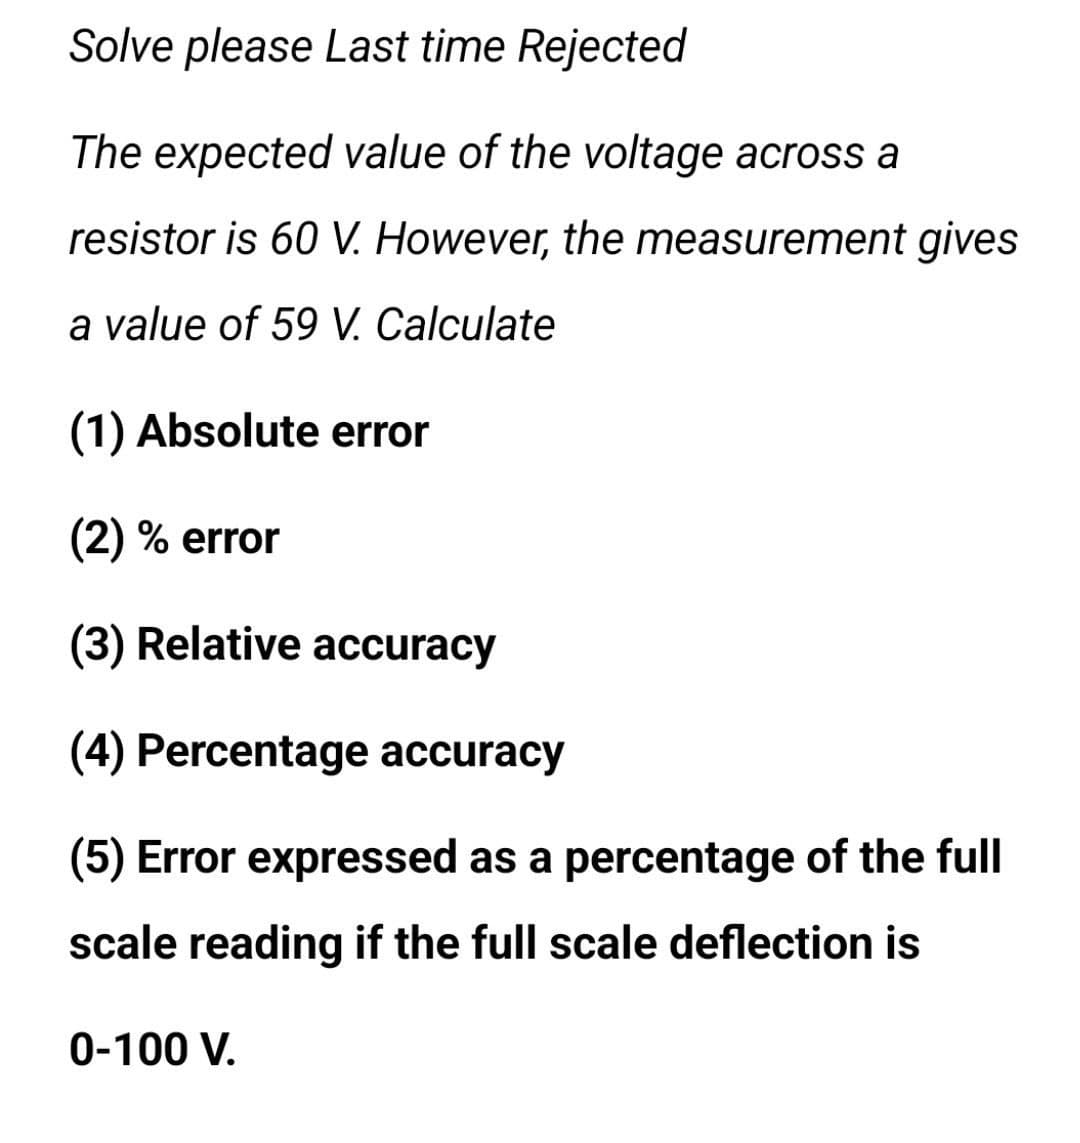 Solve please Last time Rejected
The expected value of the voltage across a
resistor is 60 V. However, the measurement gives
a value of 59 V. Calculate
(1) Absolute error
(2) % error
(3) Relative accuracy
(4) Percentage accuracy
(5) Error expressed as a percentage of the full
scale reading if the full scale deflection is
0-100 V.